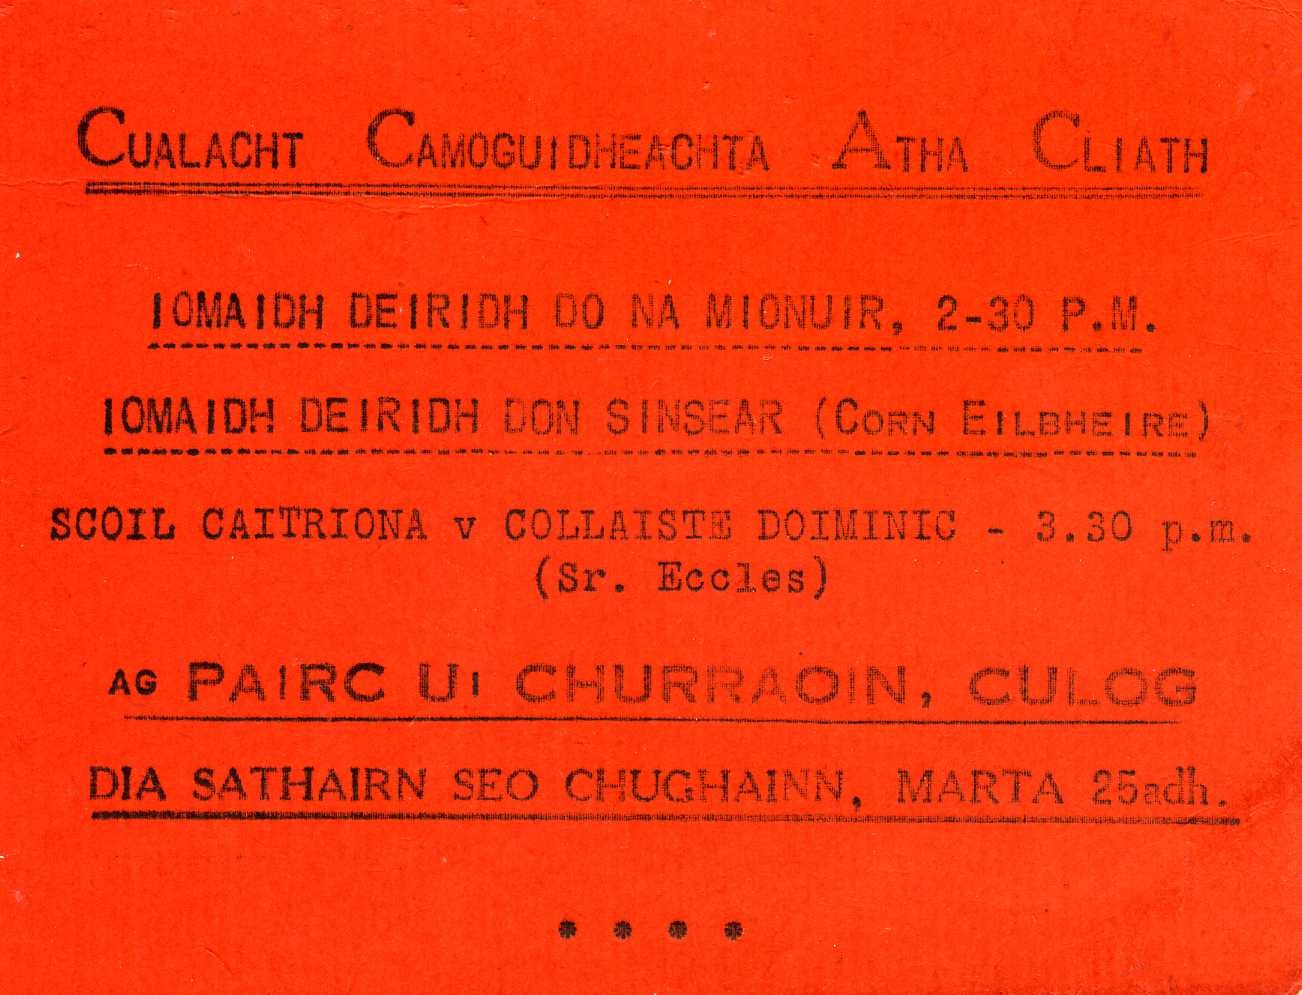 Ticket for a Dublin school’s camogie match between Scoil Caitriona and Collaiste Dominic in Coolock.